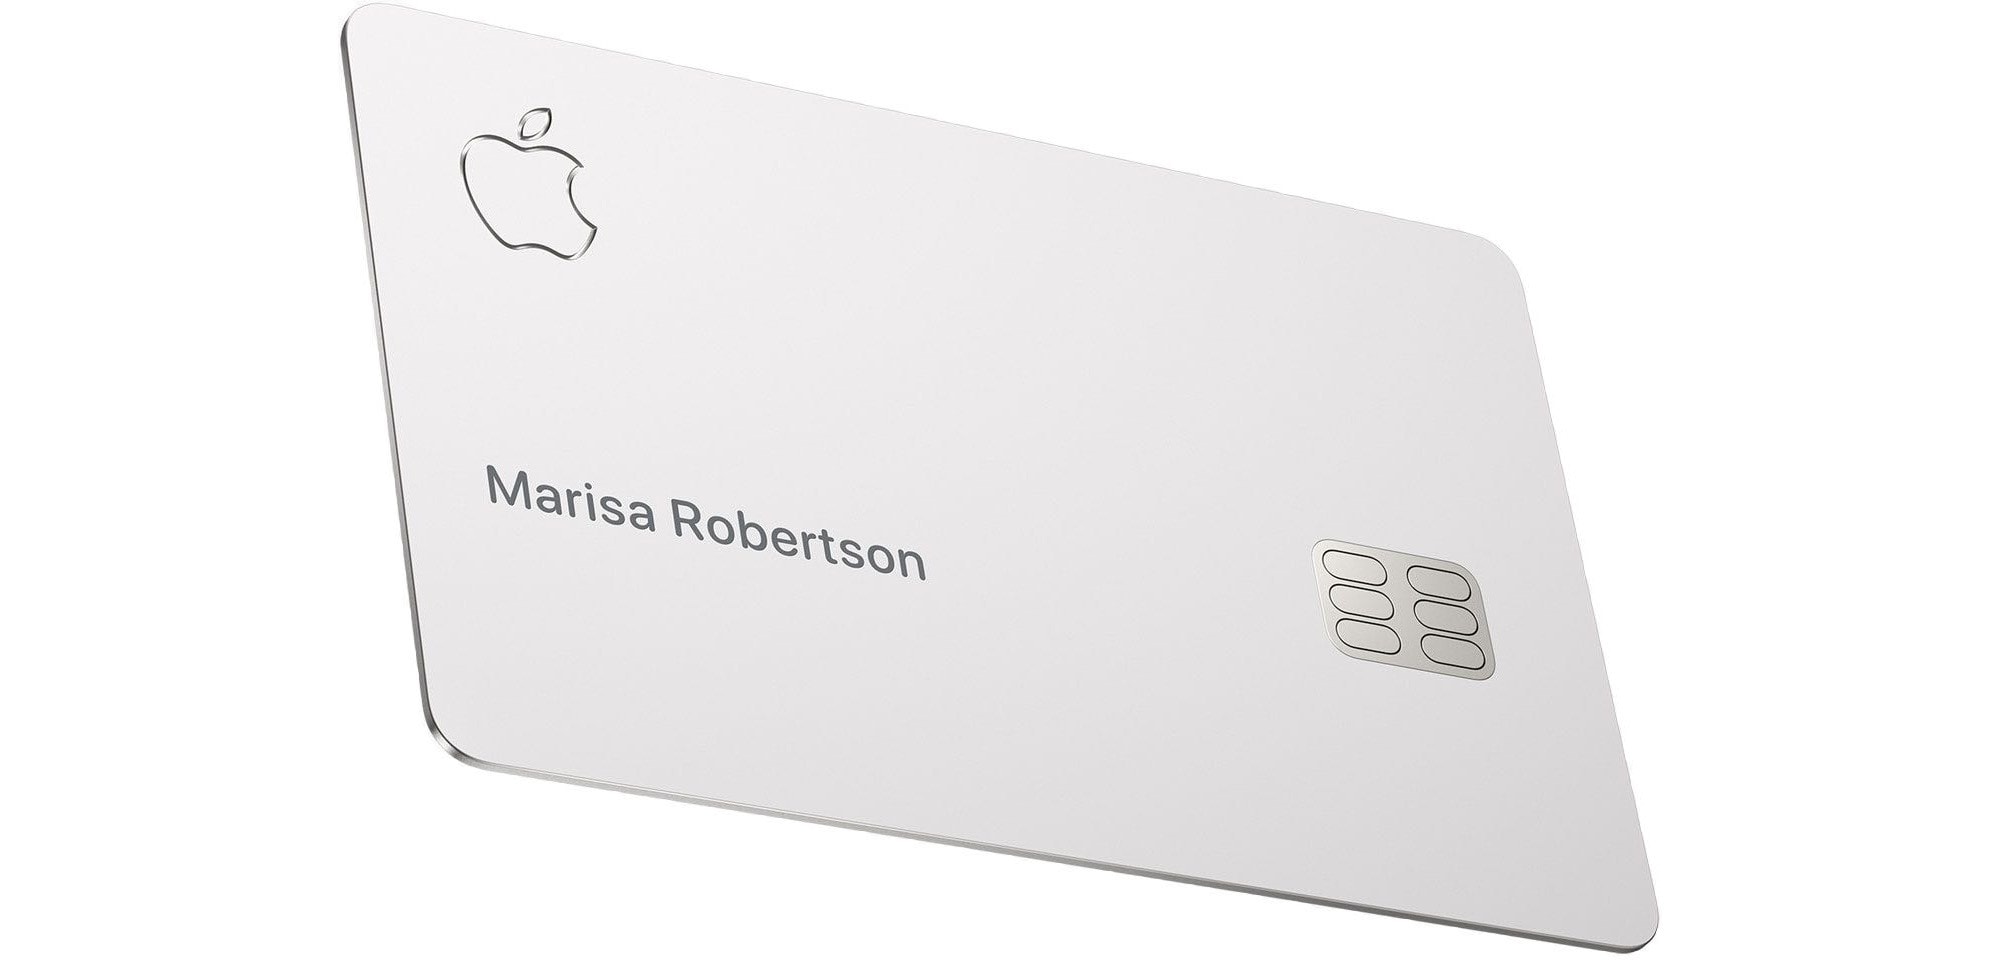 Making Apple Card payments is as simple as its design.